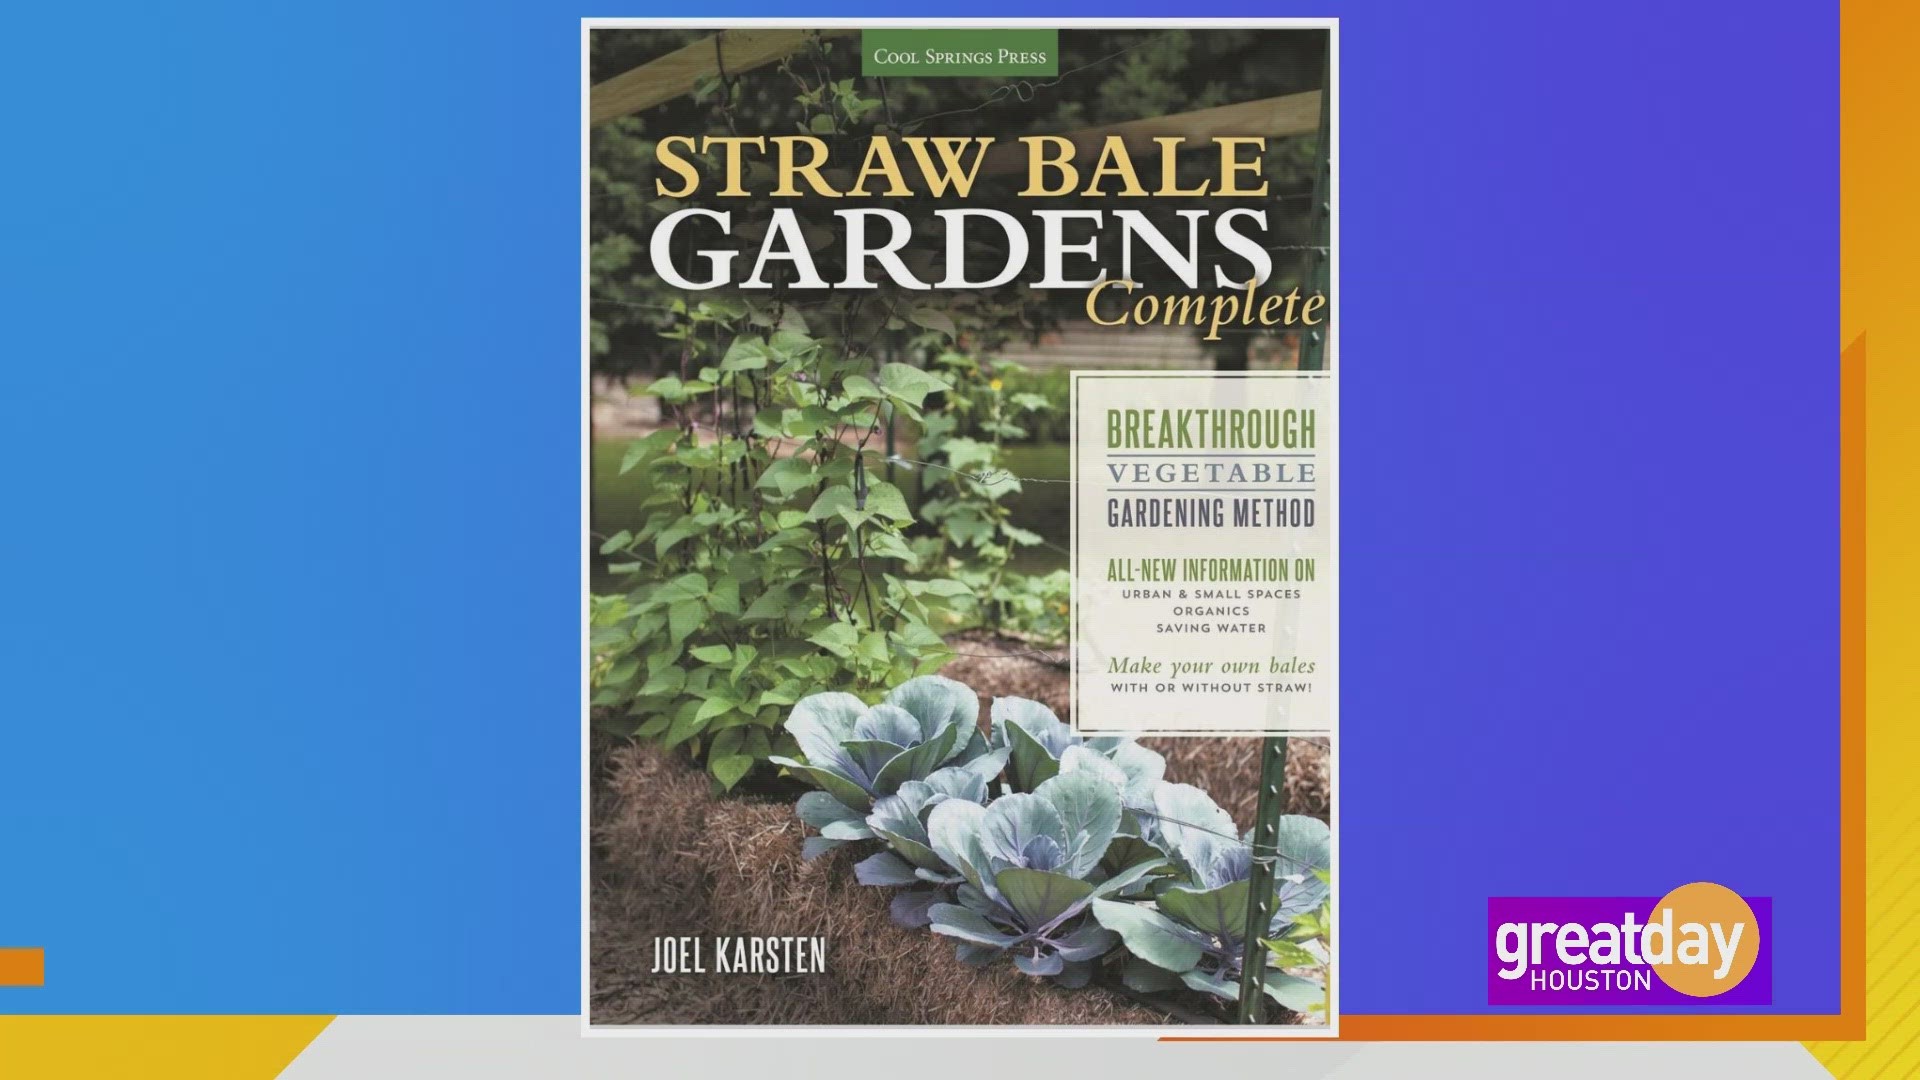 If you don't have a traditional yard to grow the vegetables you love, you can still make your own garden using straw bale.